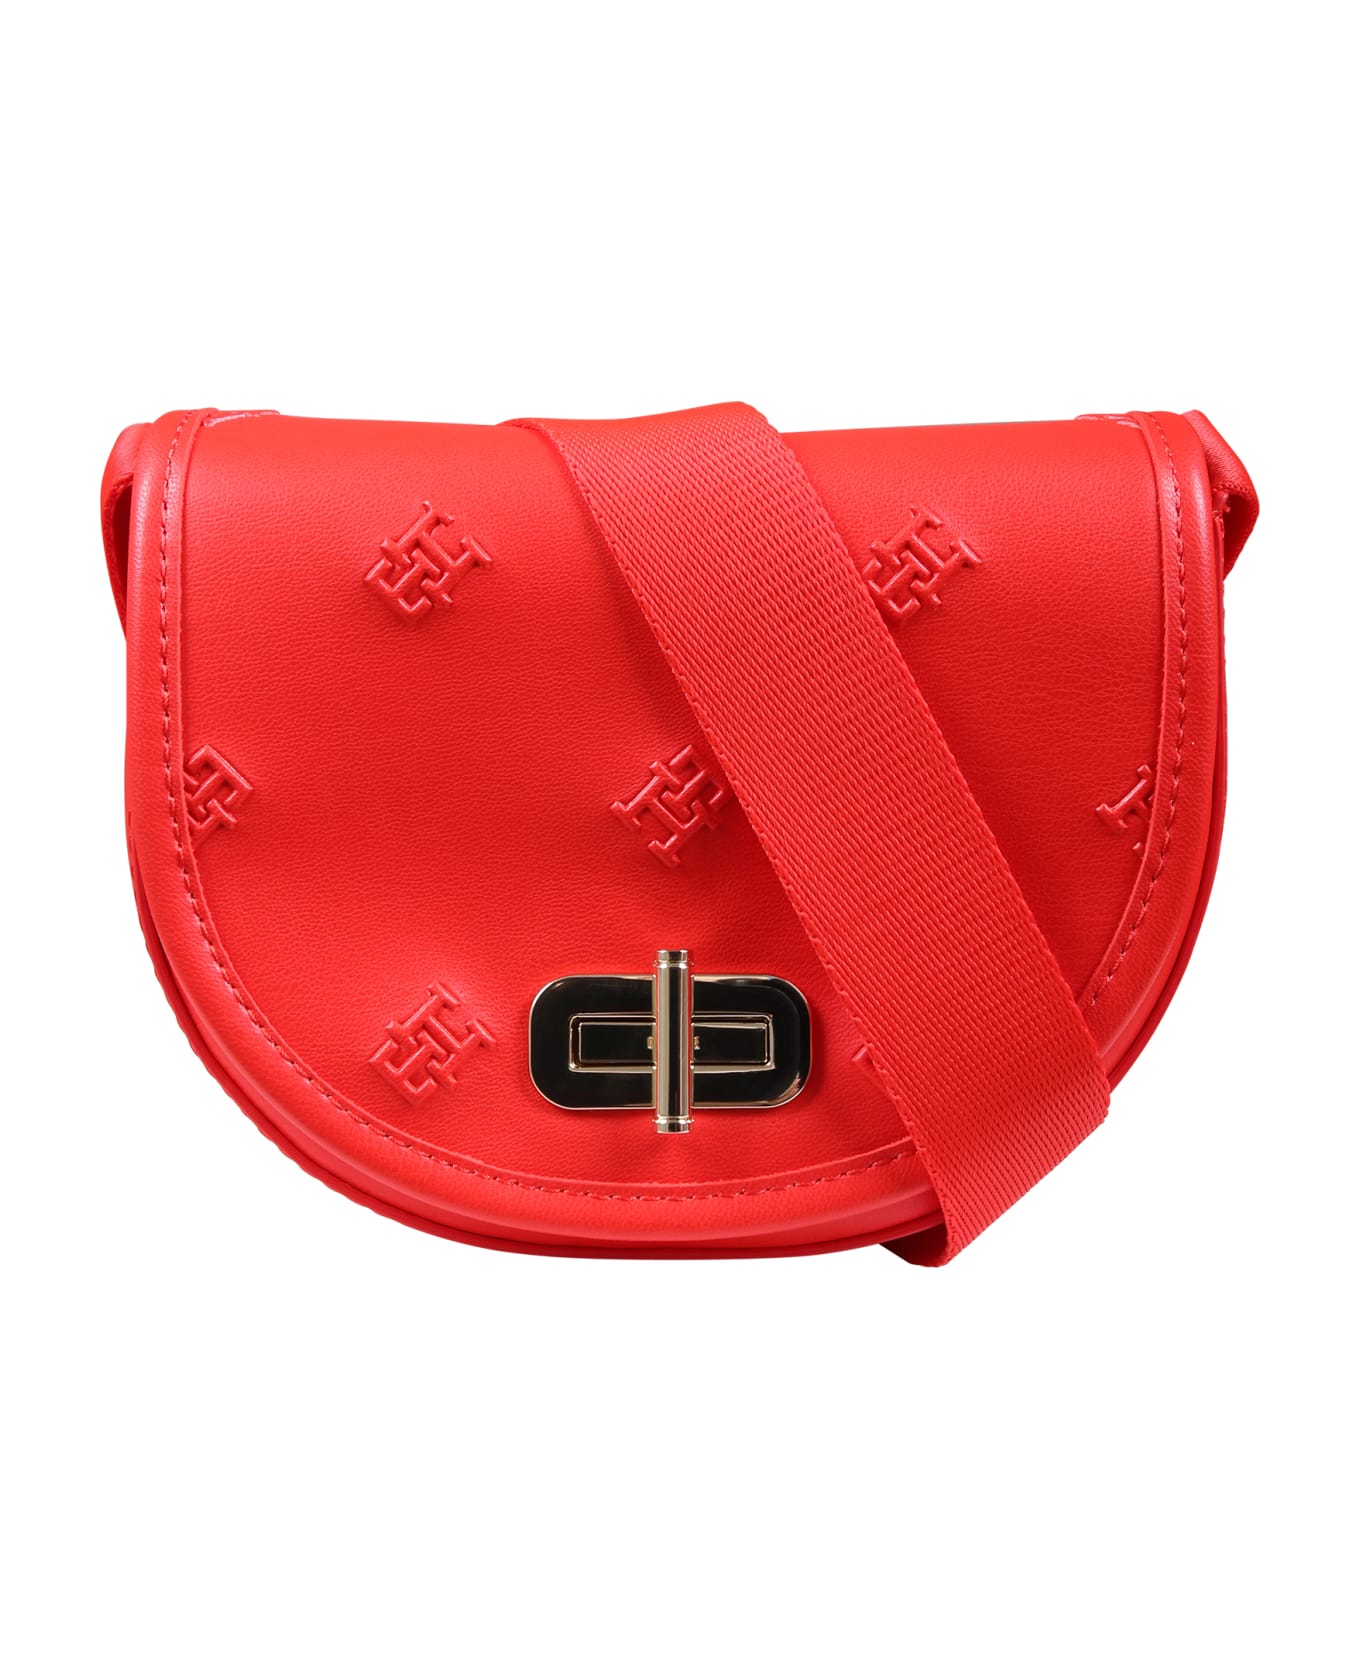 Tommy Hilfiger Red Bag For Girl With All-over Logo - Red アクセサリー＆ギフト